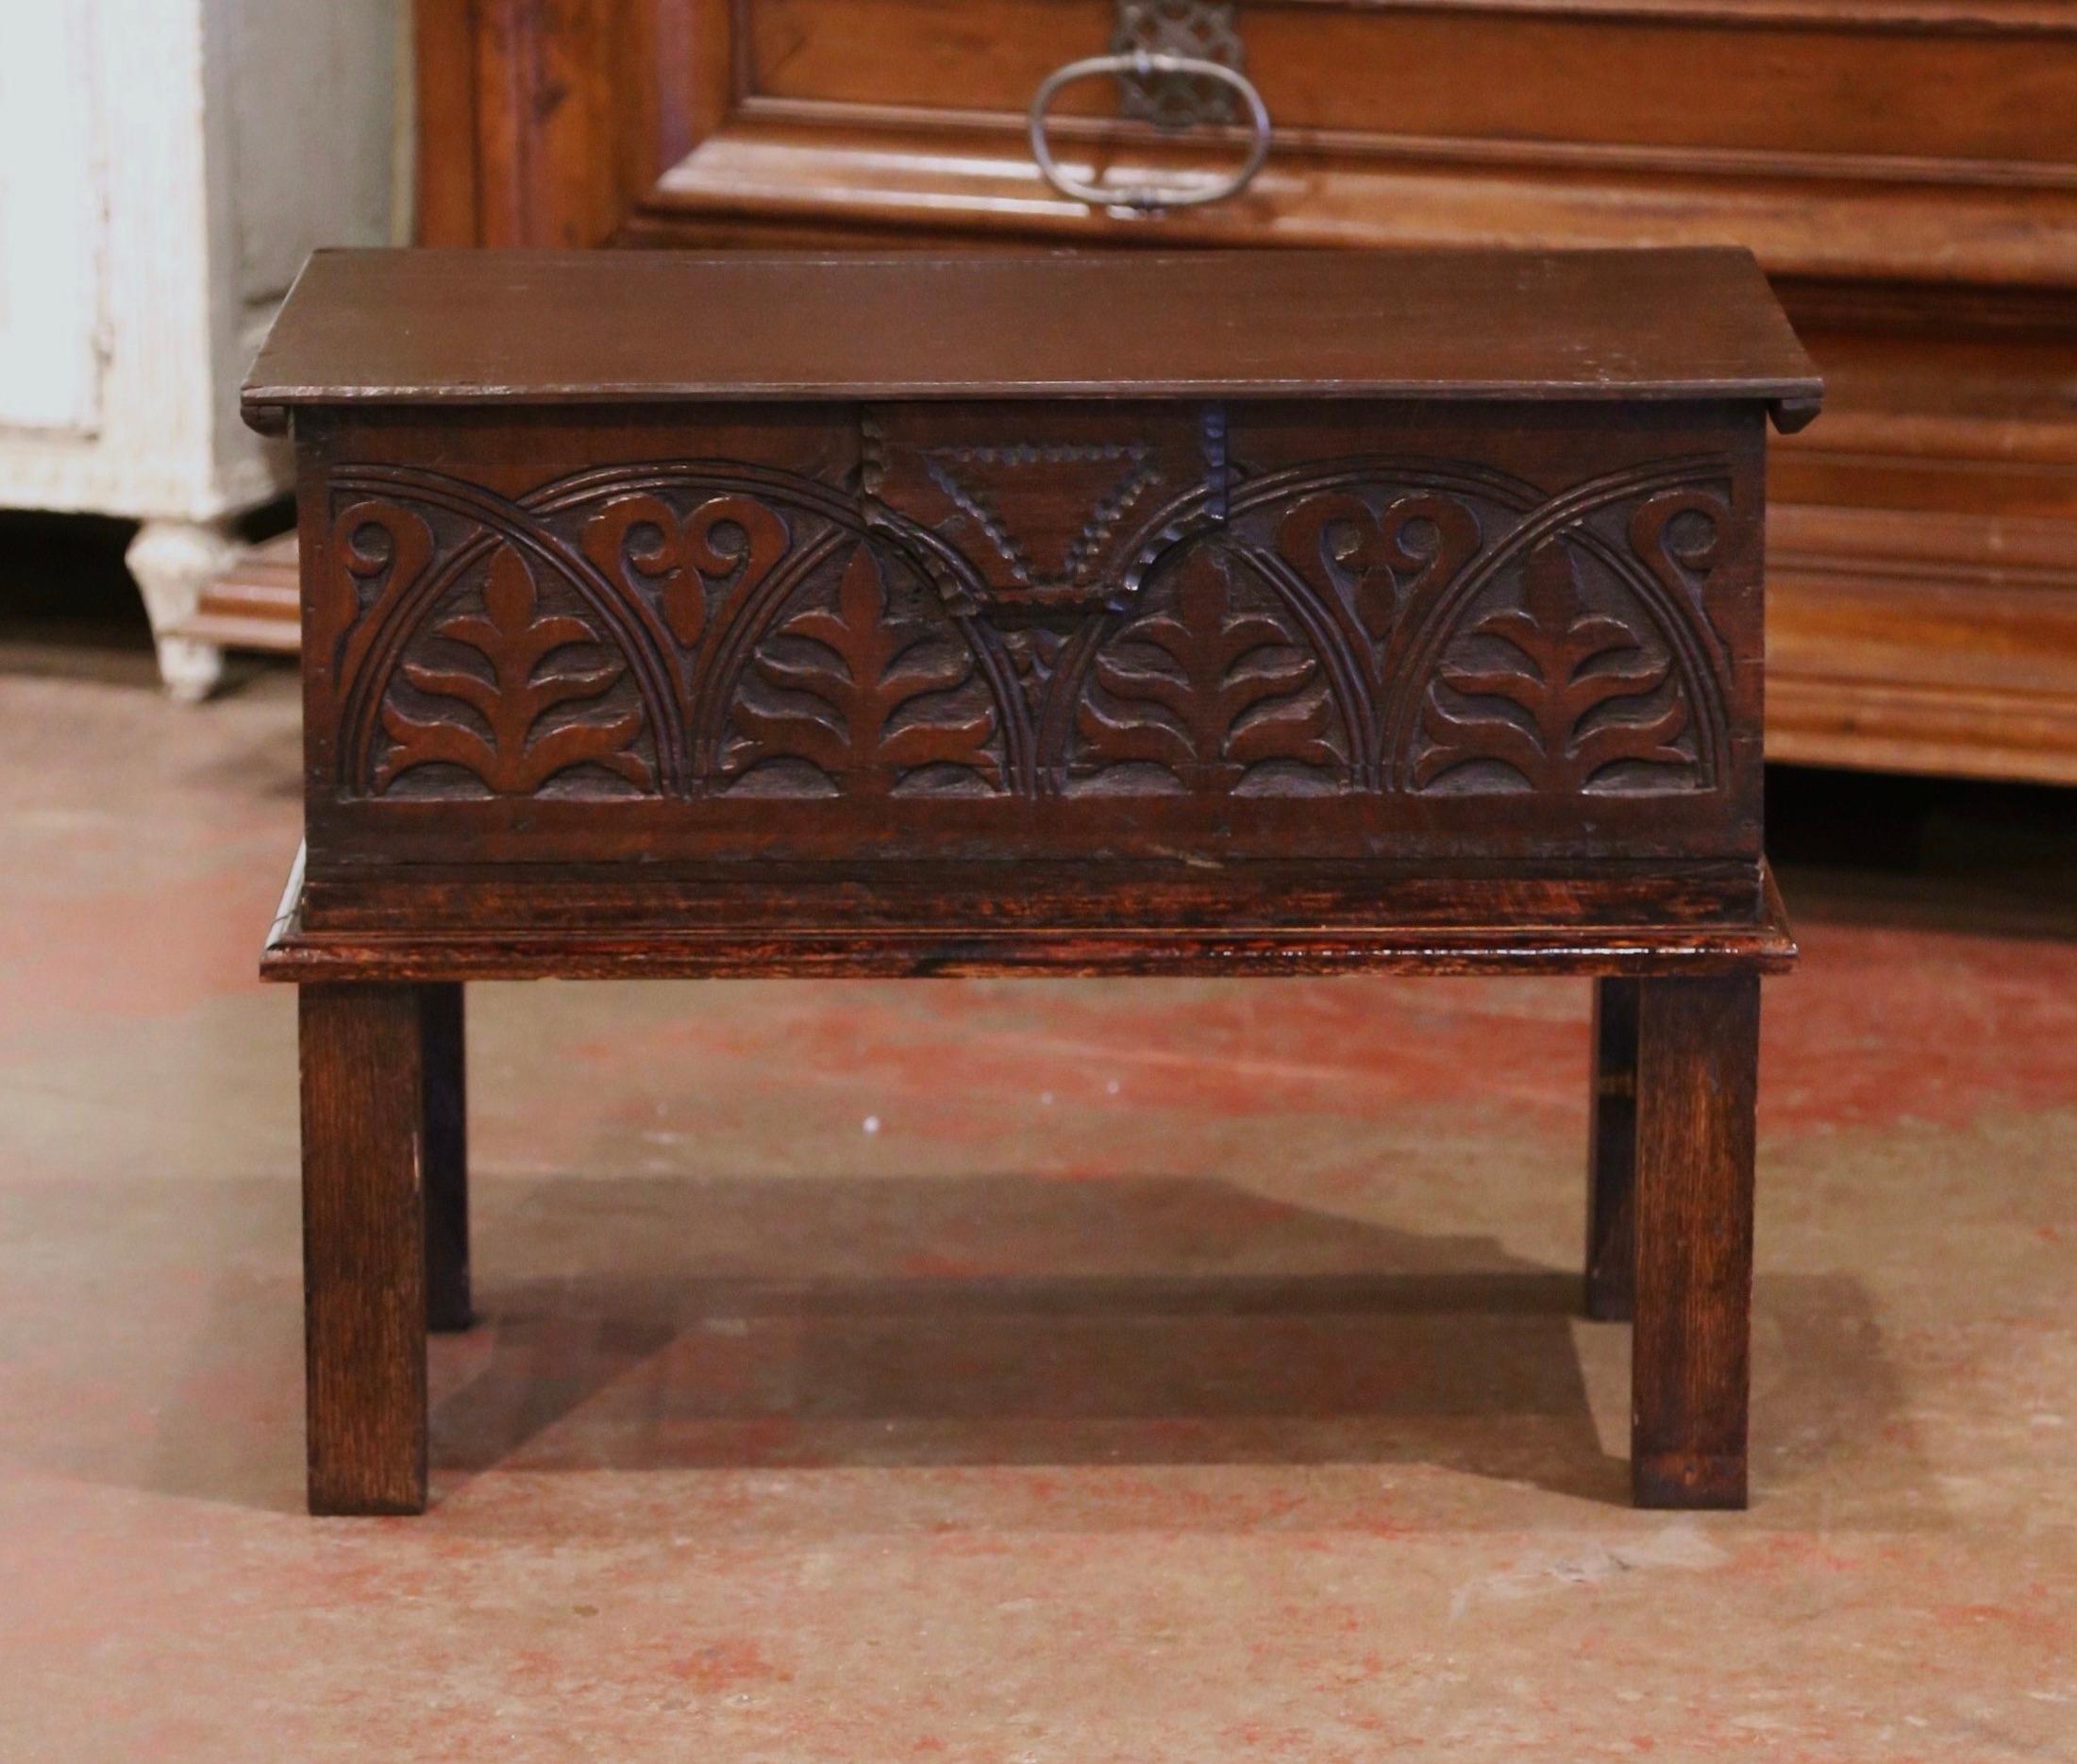 This Classic, antique bible box was carved in England circa 1860. The sturdy, Baroque style trunk, standing on a wooden base, features deep floral decor carvings on the front. The trunk opens from the top to reveal an inside storage compartment, and